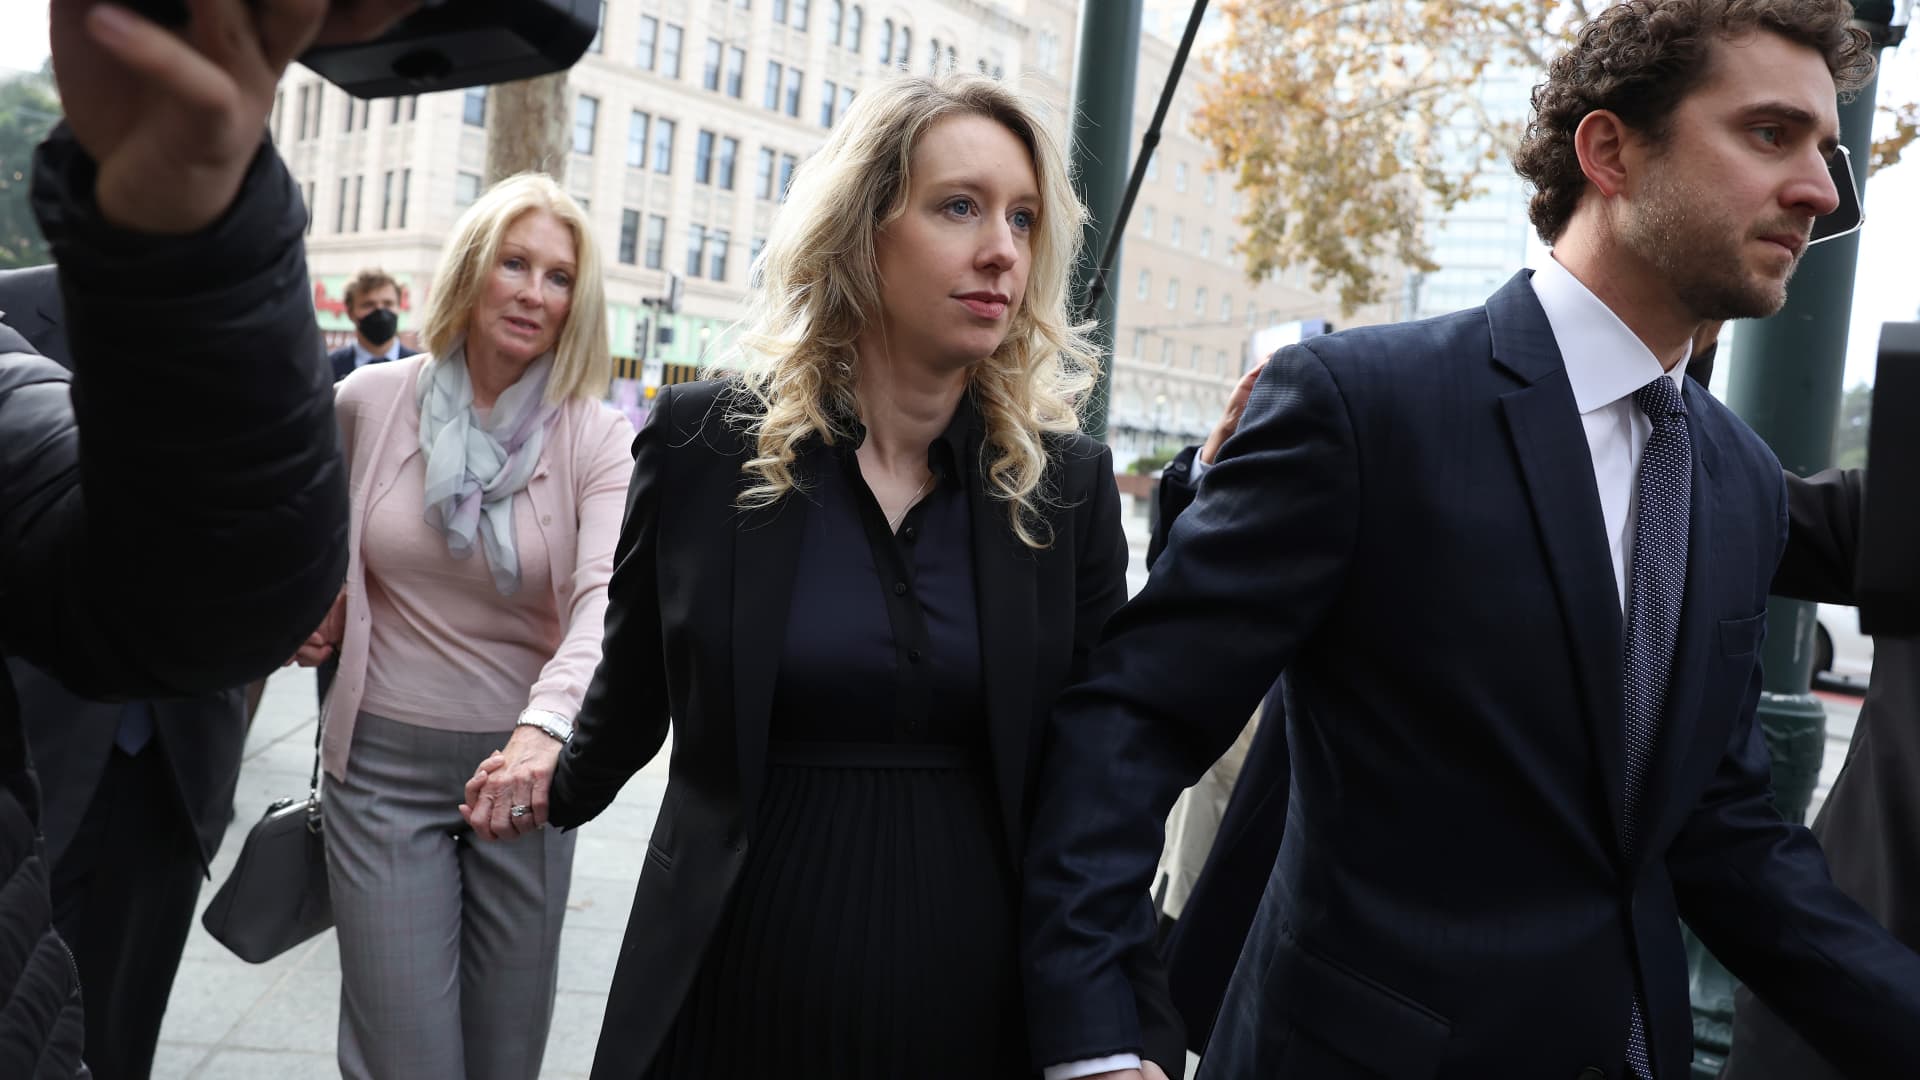 Former Theranos CEO Elizabeth Holmes sentenced to more than 11 years in prison